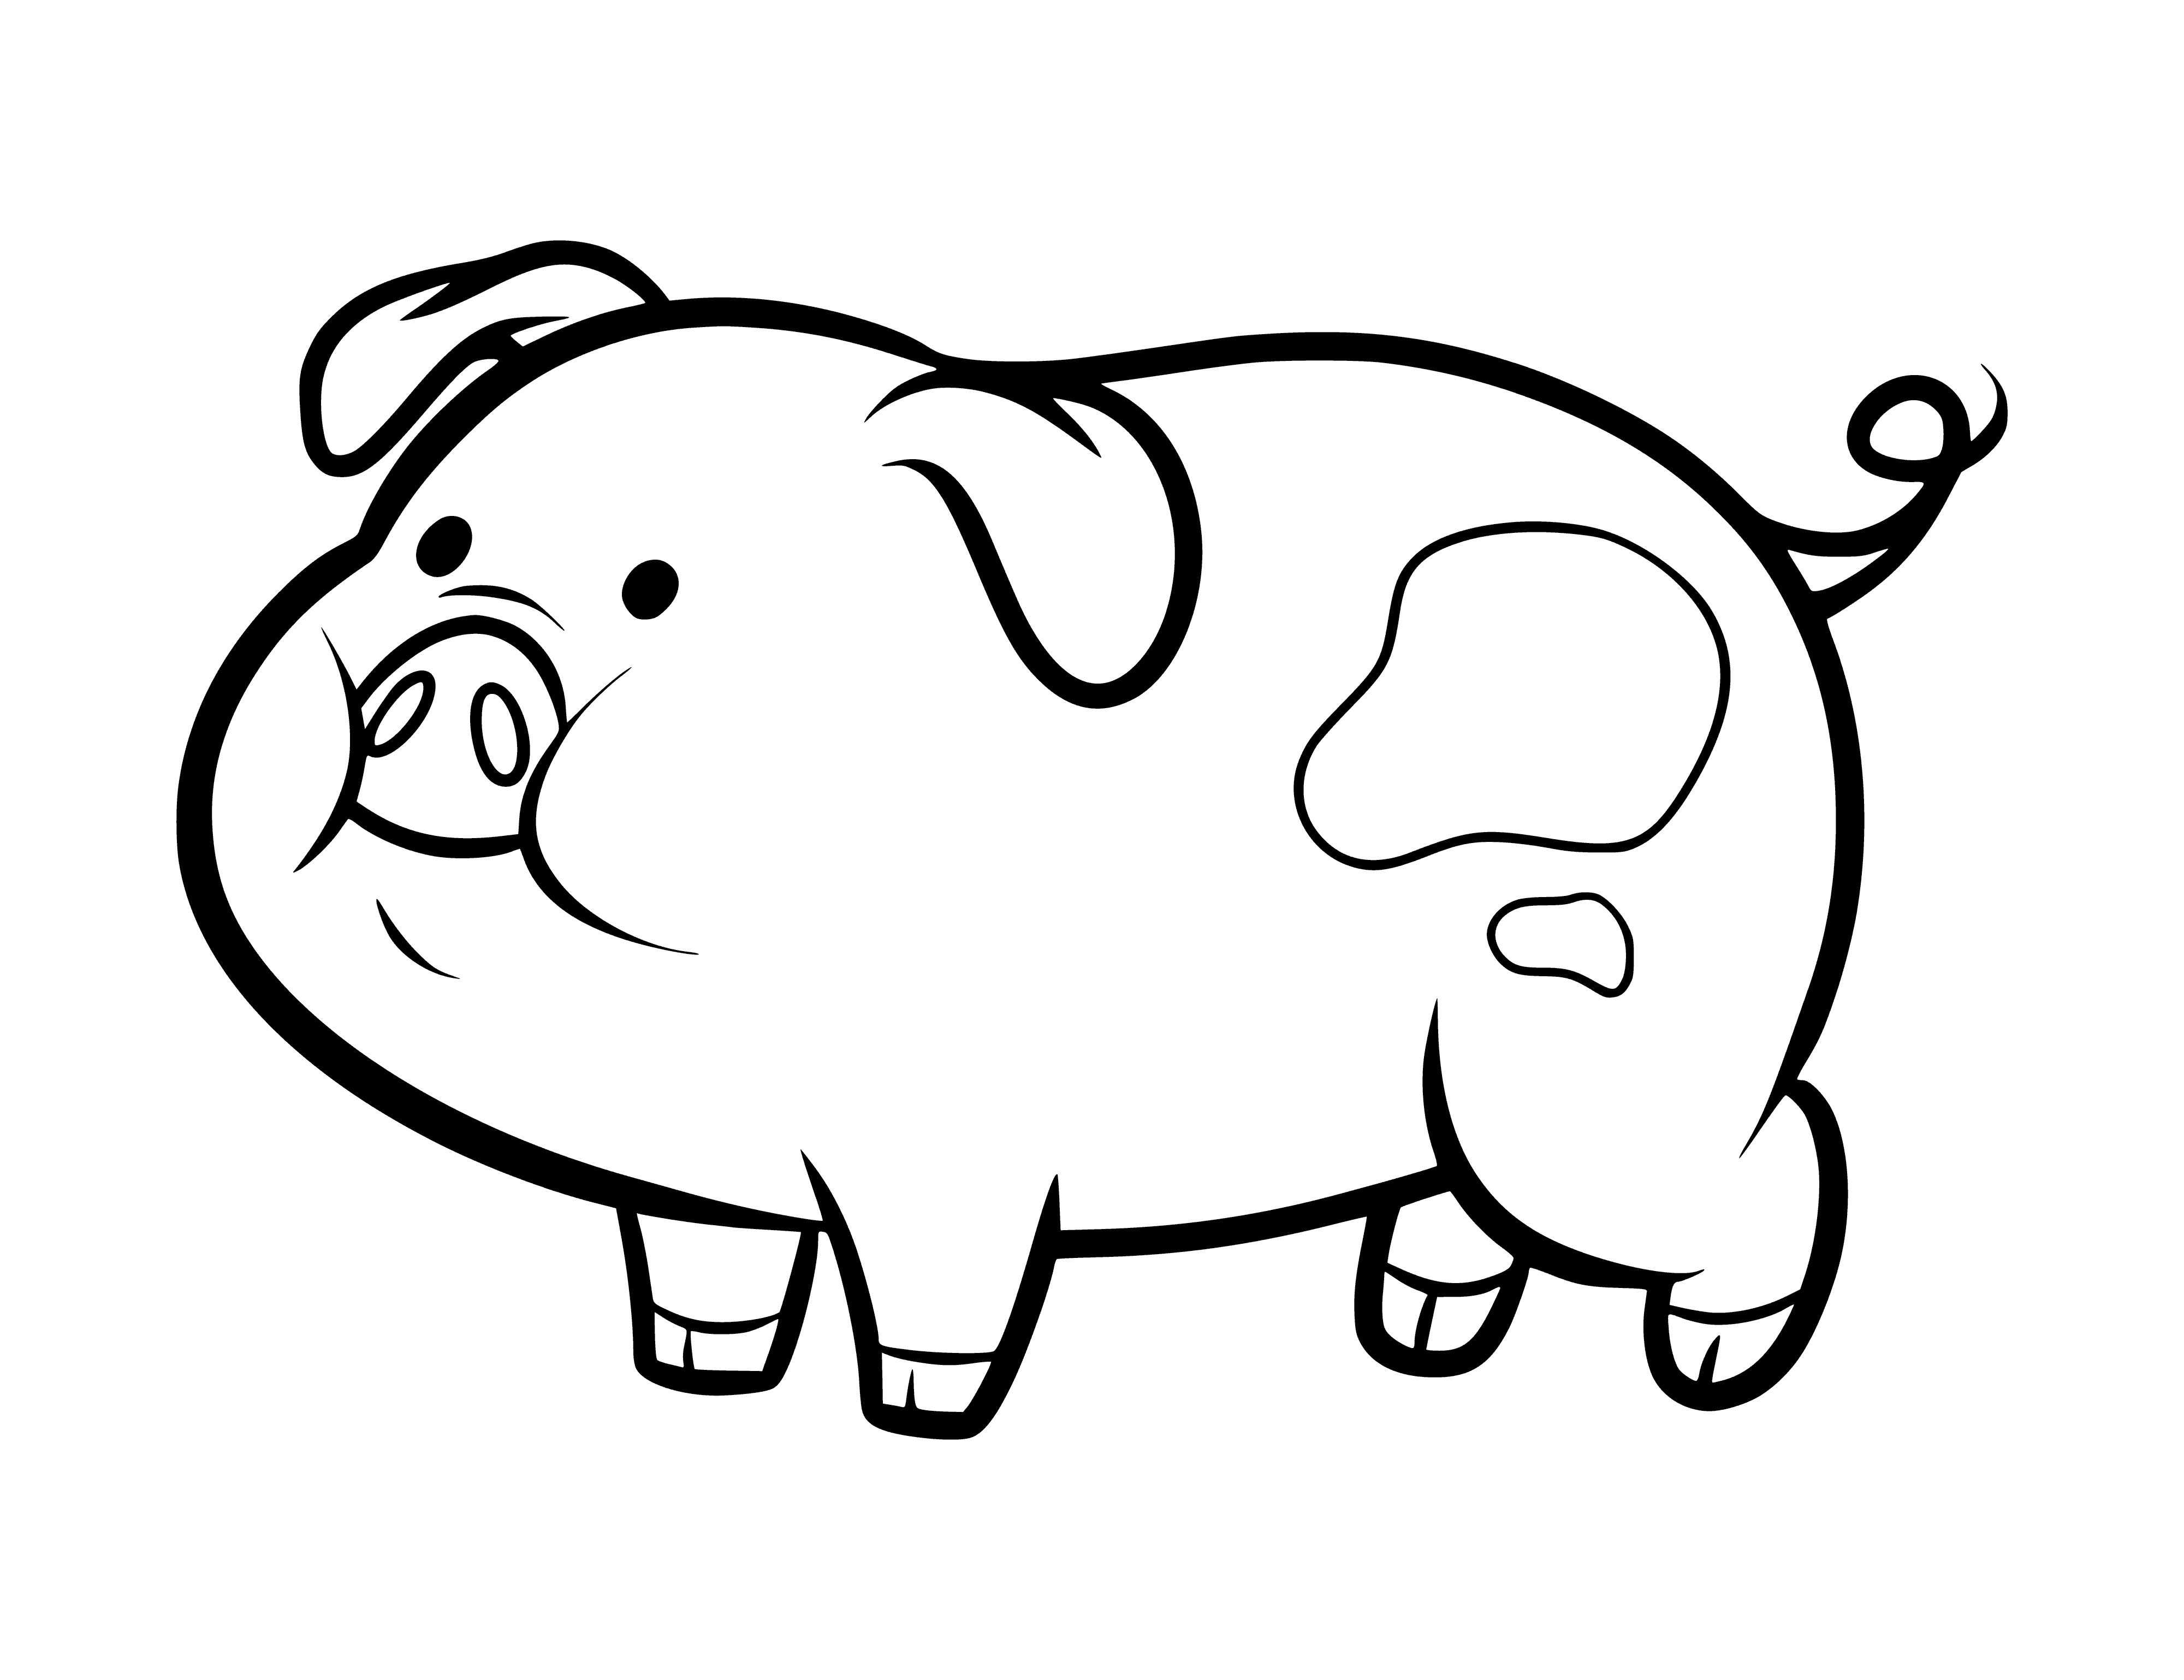 coloring page: Small pig sits eating from bowl; has short, pink fur, snout, curly tail and black eyes.